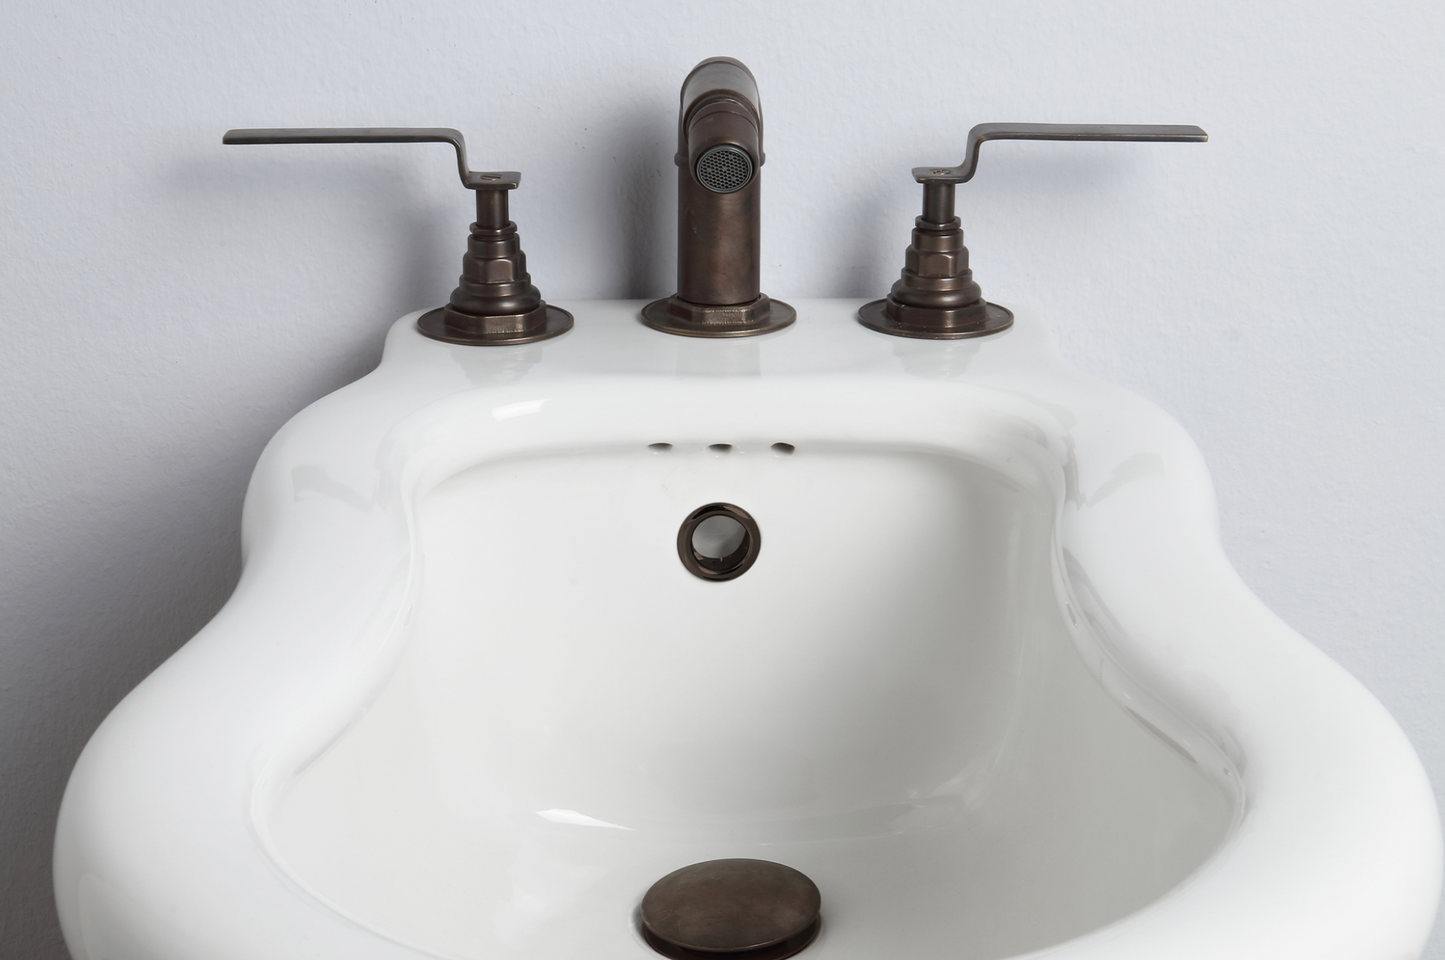 Industrialis bidet faucets by Balneo Toscia Industrial style